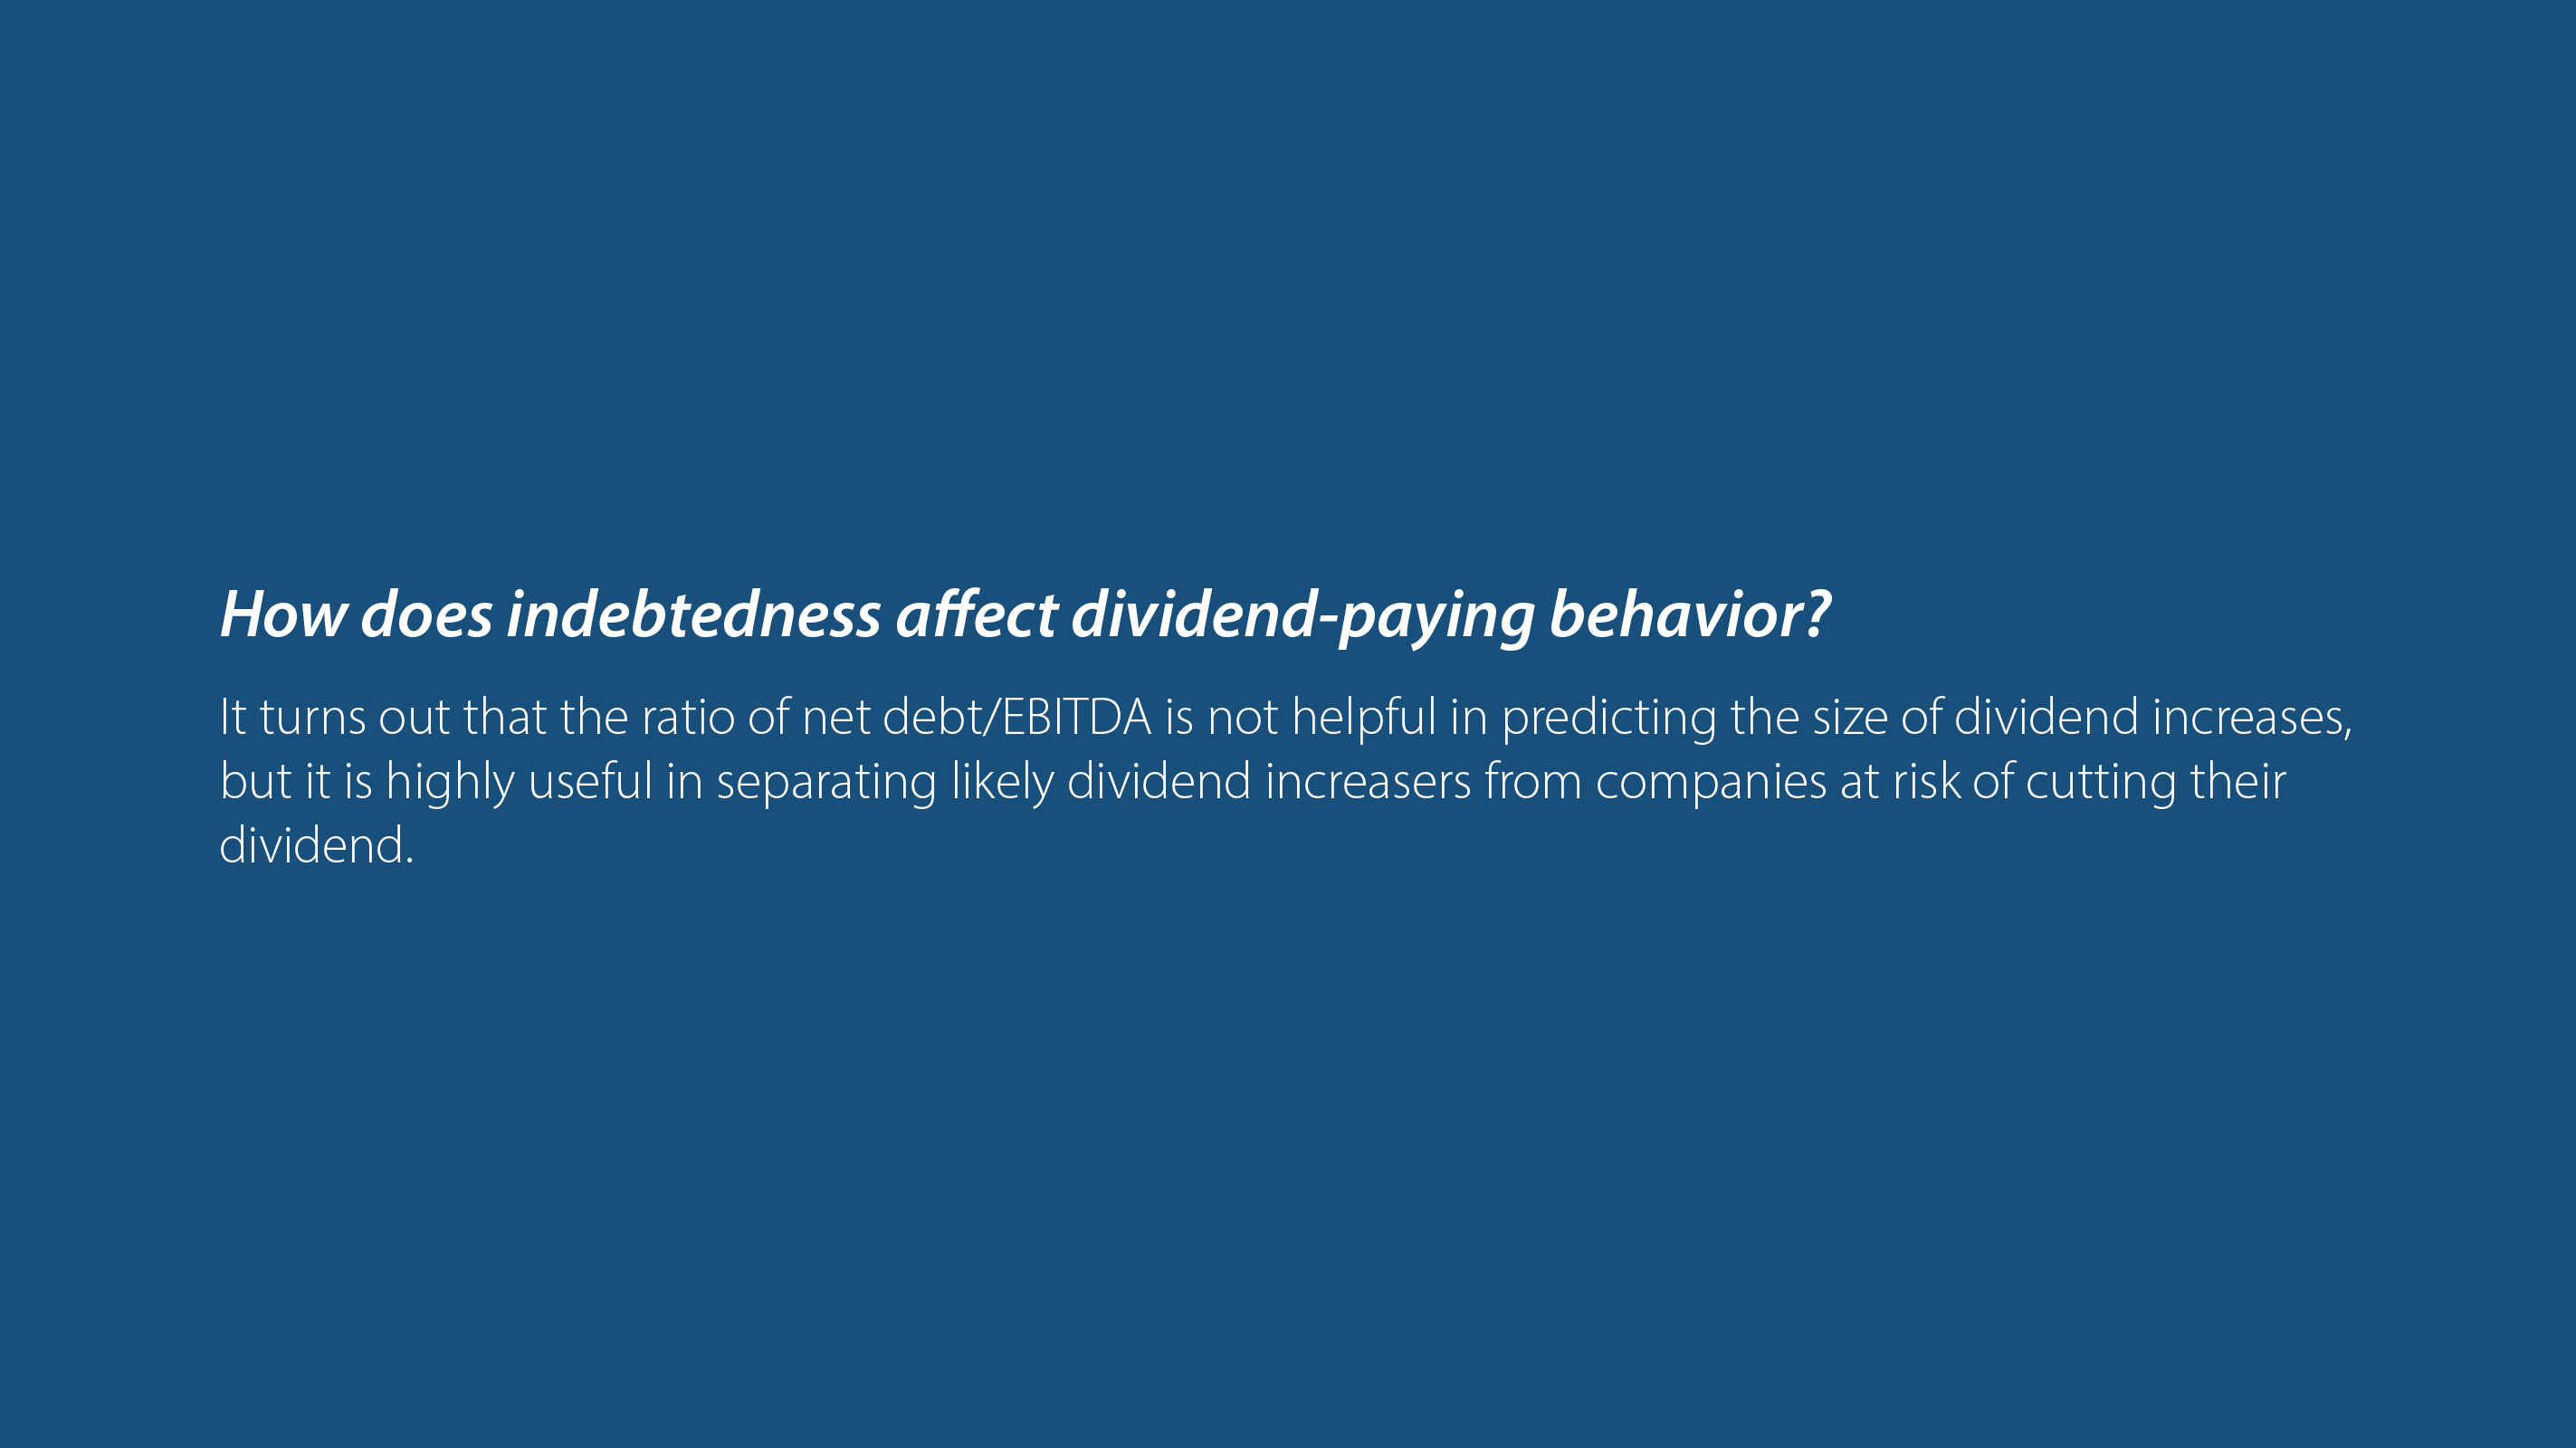 How does indebtedness affect dividend-paying behavior?